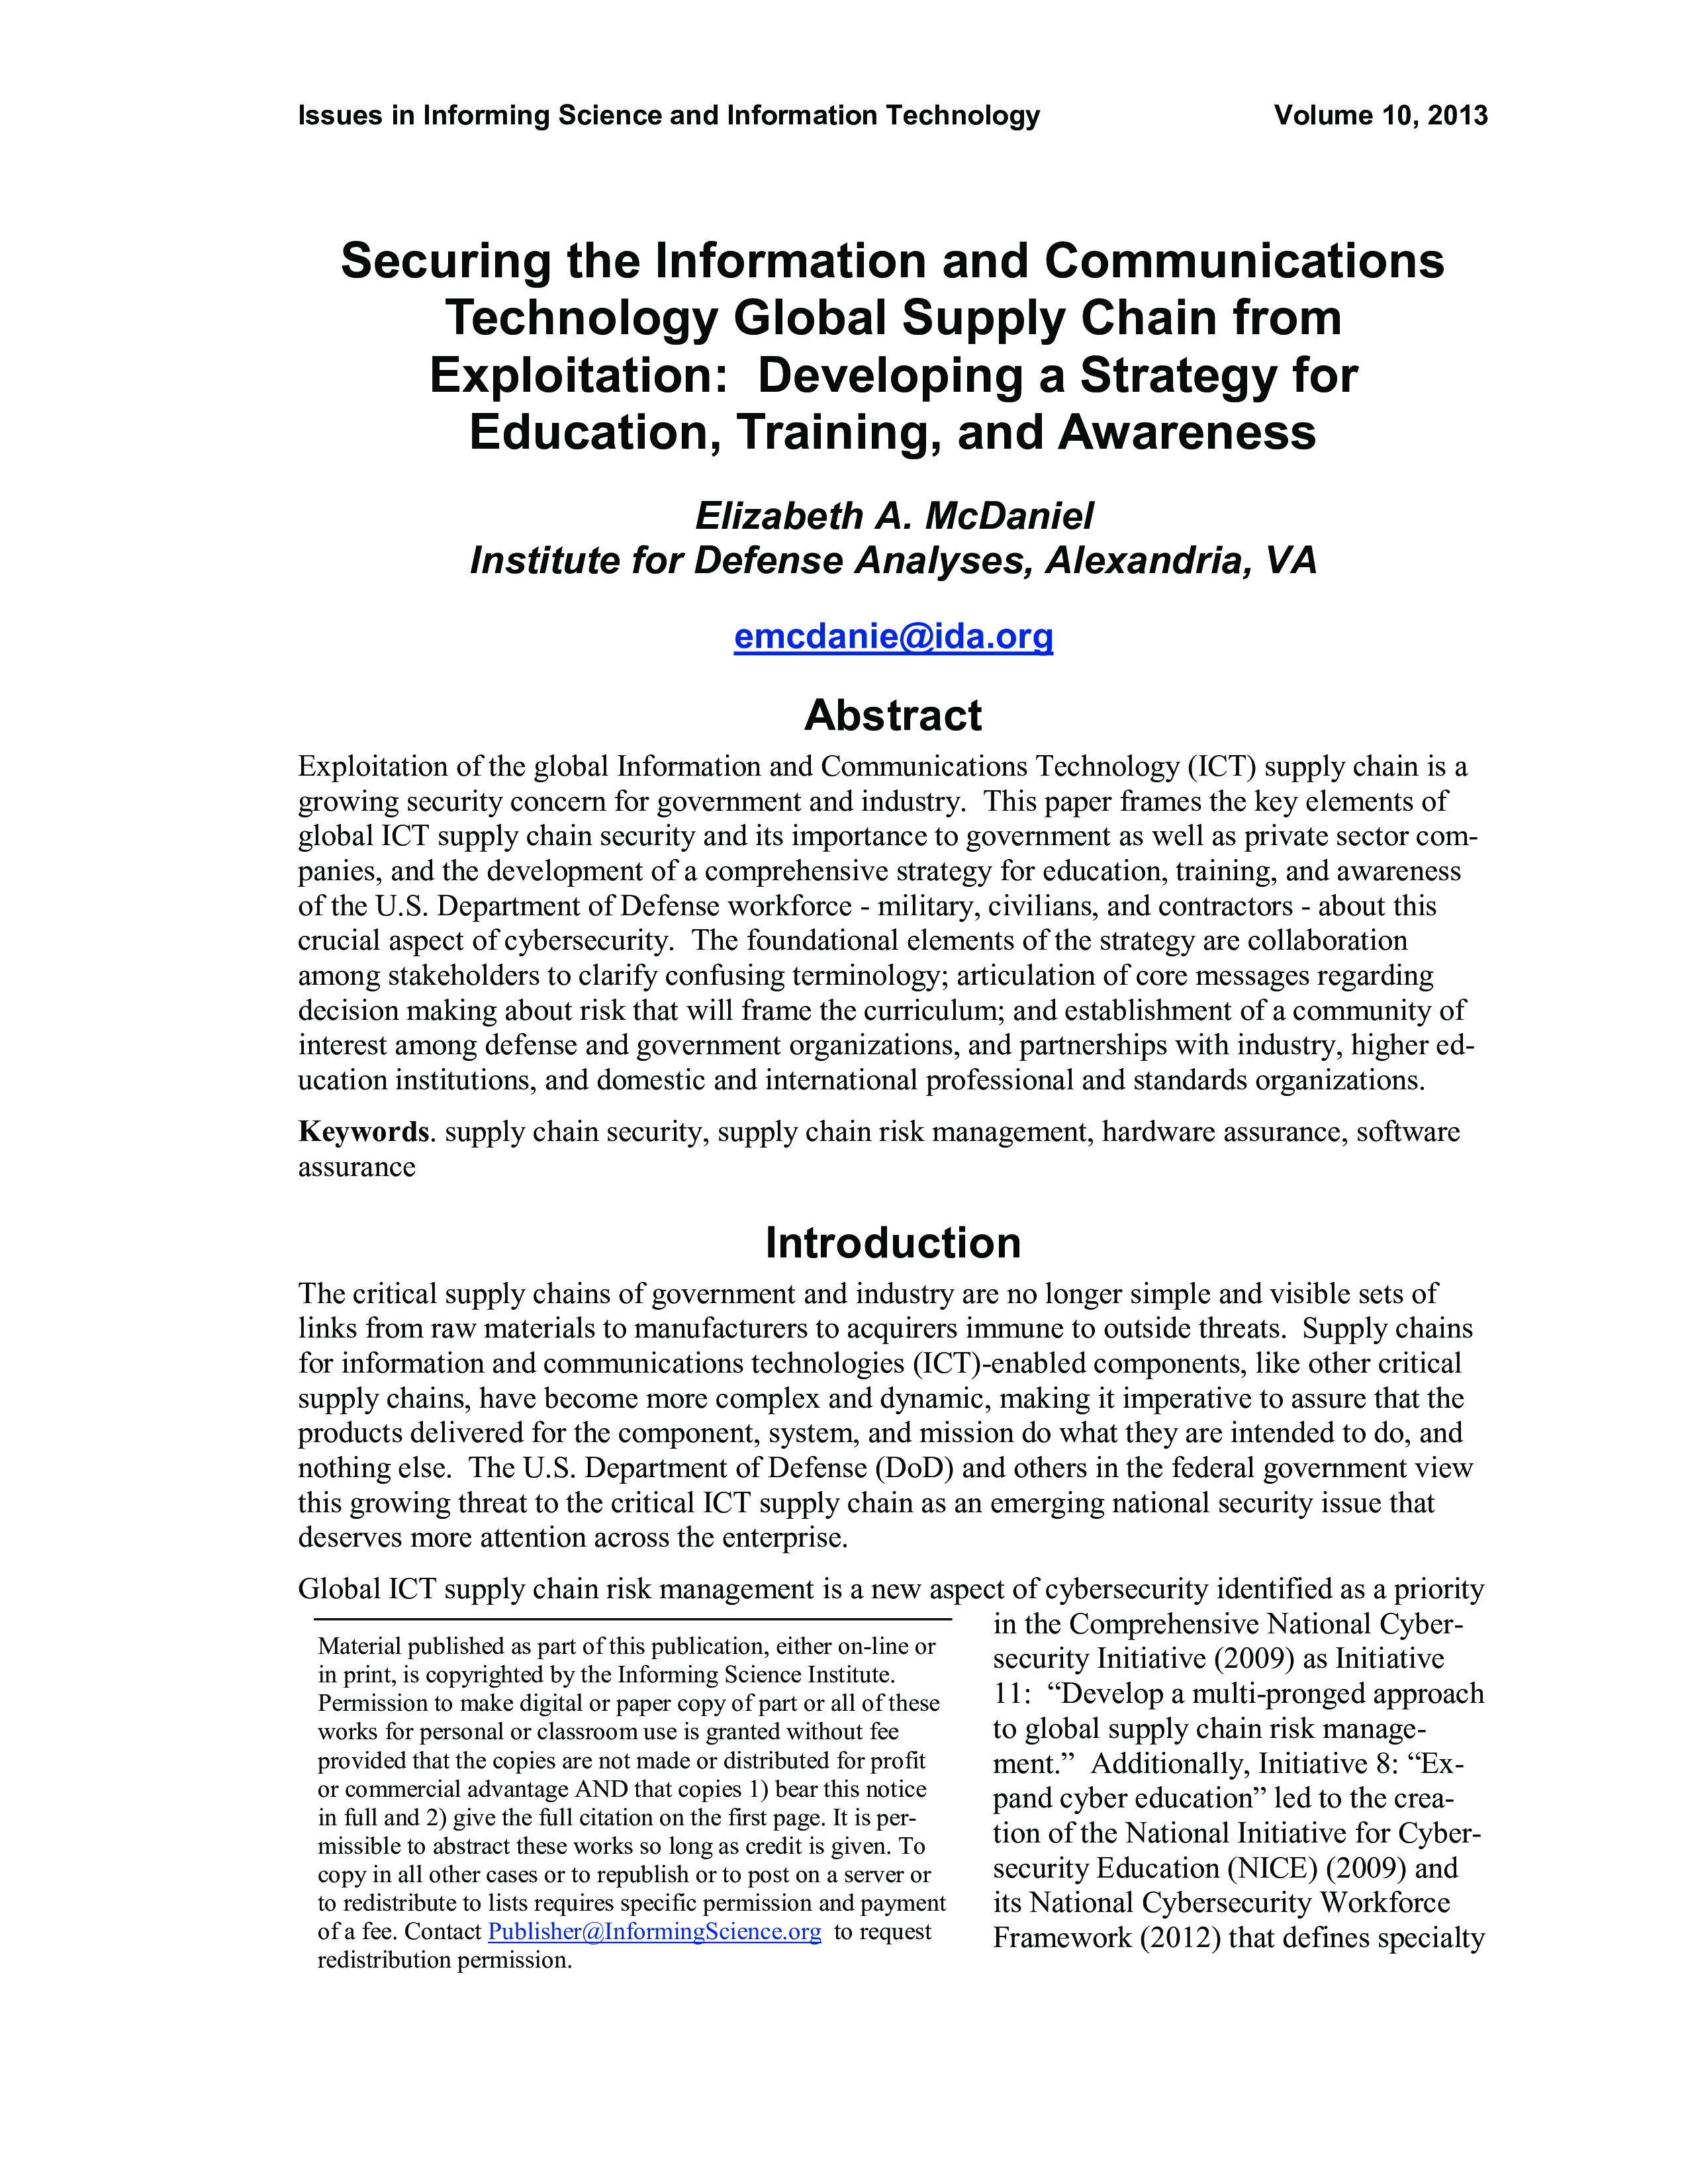 	Securing the Information and Communications Technology Global Supply Chain from Exploitation: Developing a Strategy for Education, Training, and Awareness